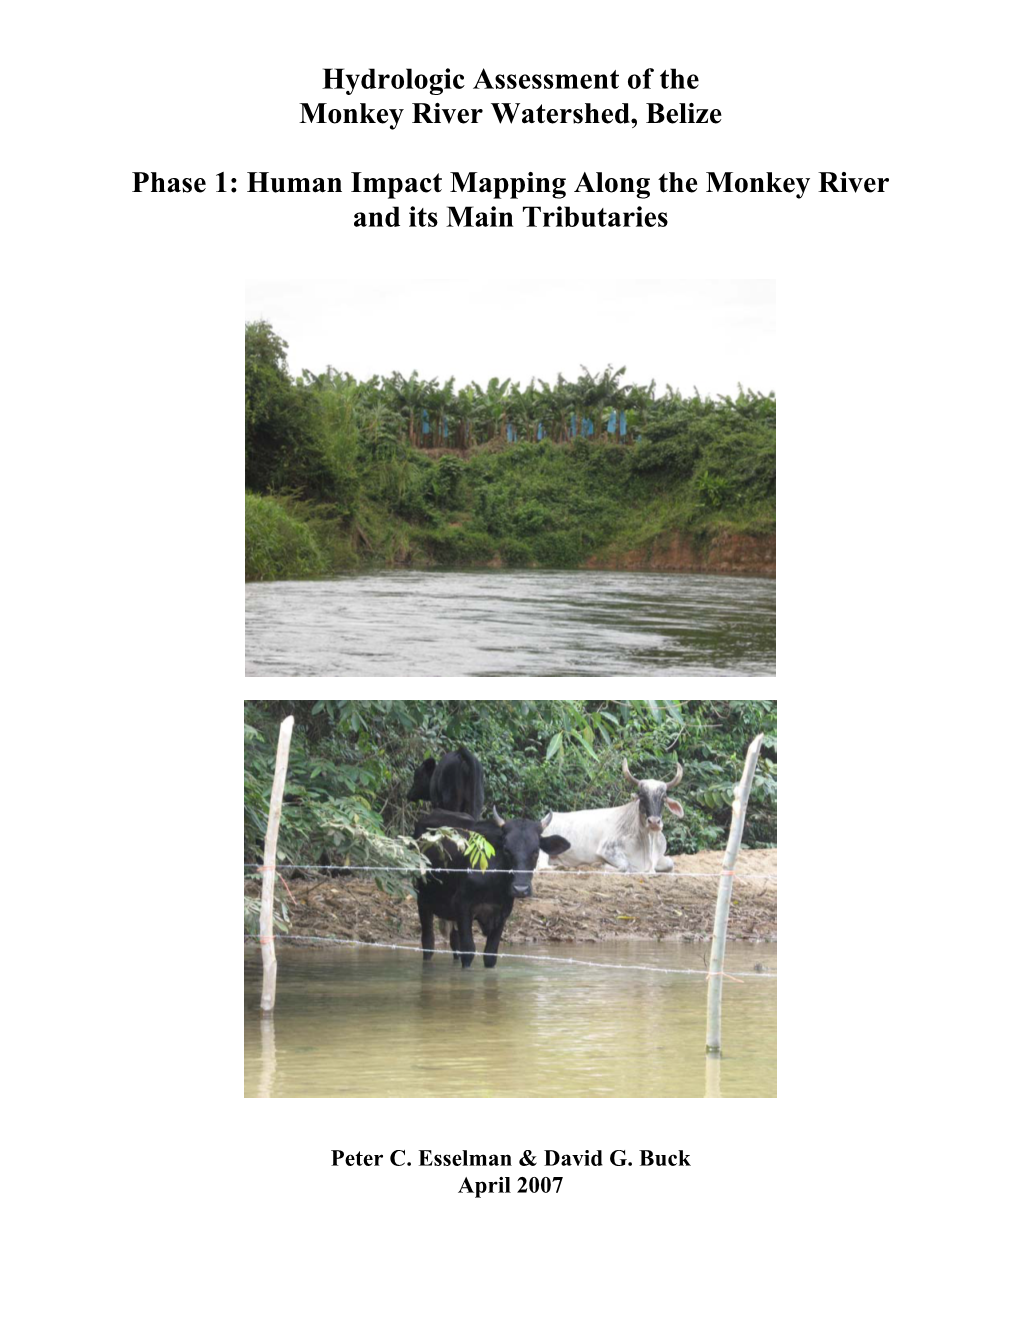 Human Impact Mapping Along the Monkey River and Its Main Tributaries